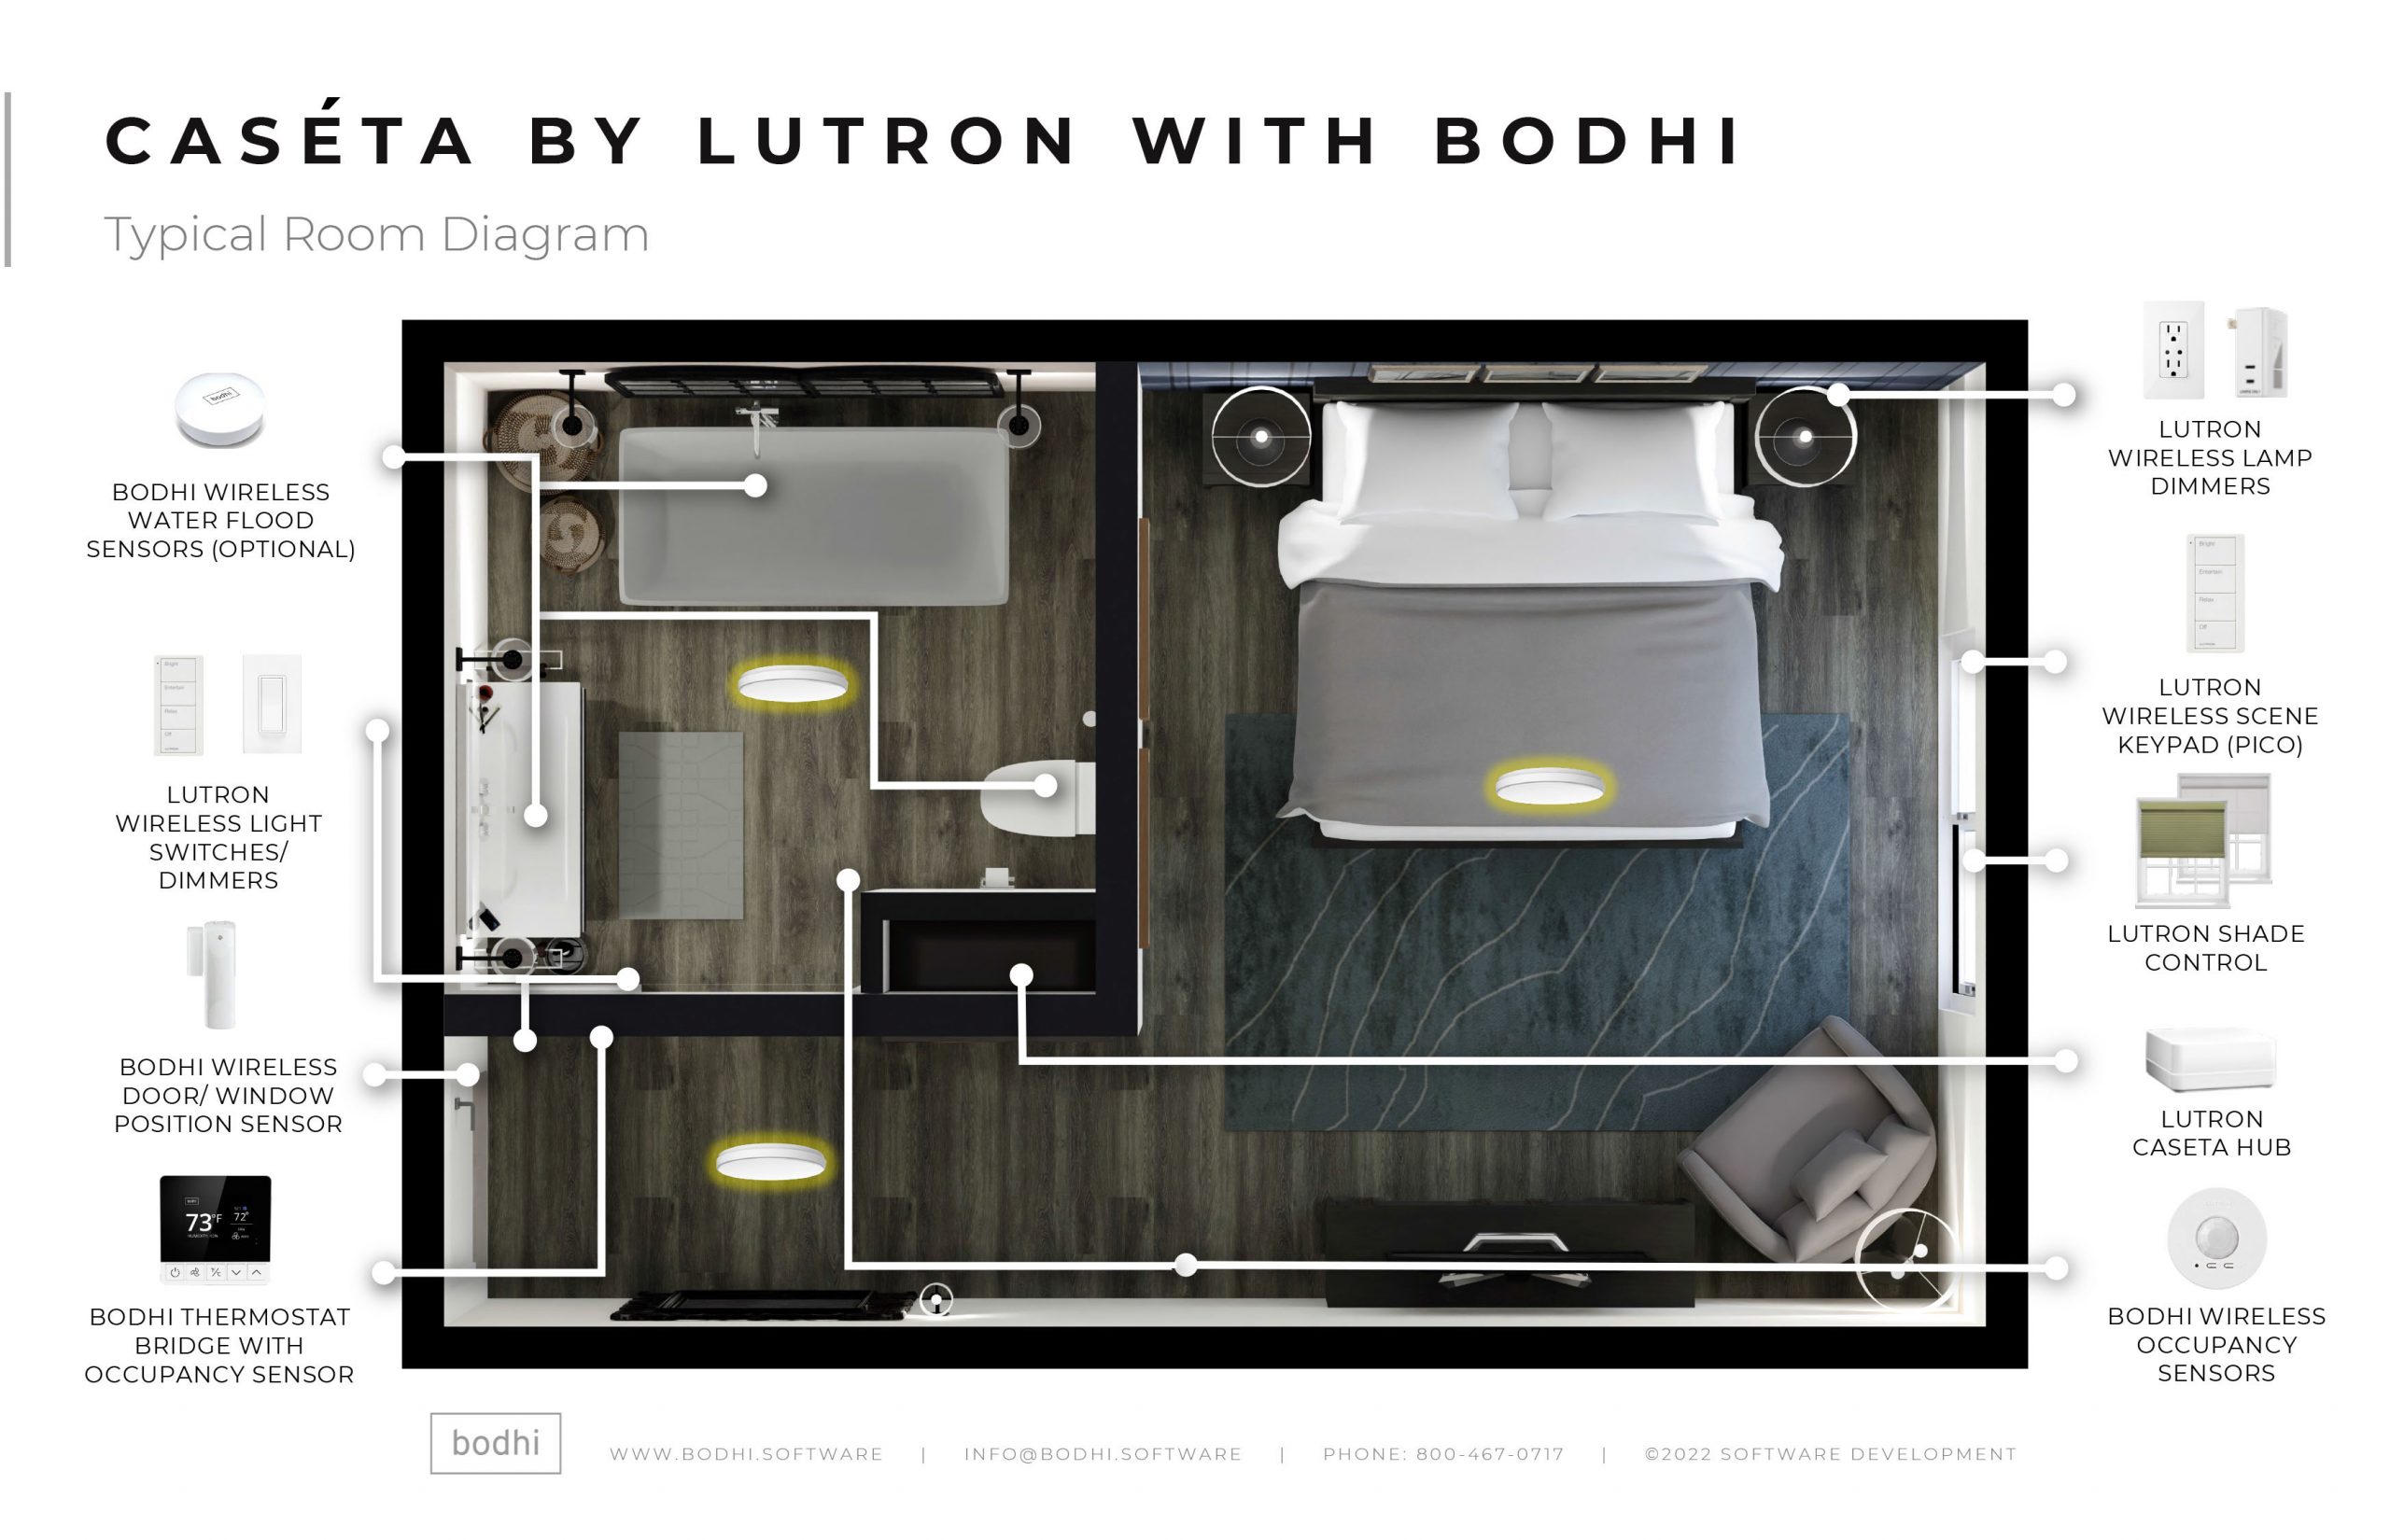 Add Bodhi to Lutron’s low-cost Caséta to create a powerful lighting, shading and climate control solution for any hotel, resort, or multi-resident community.